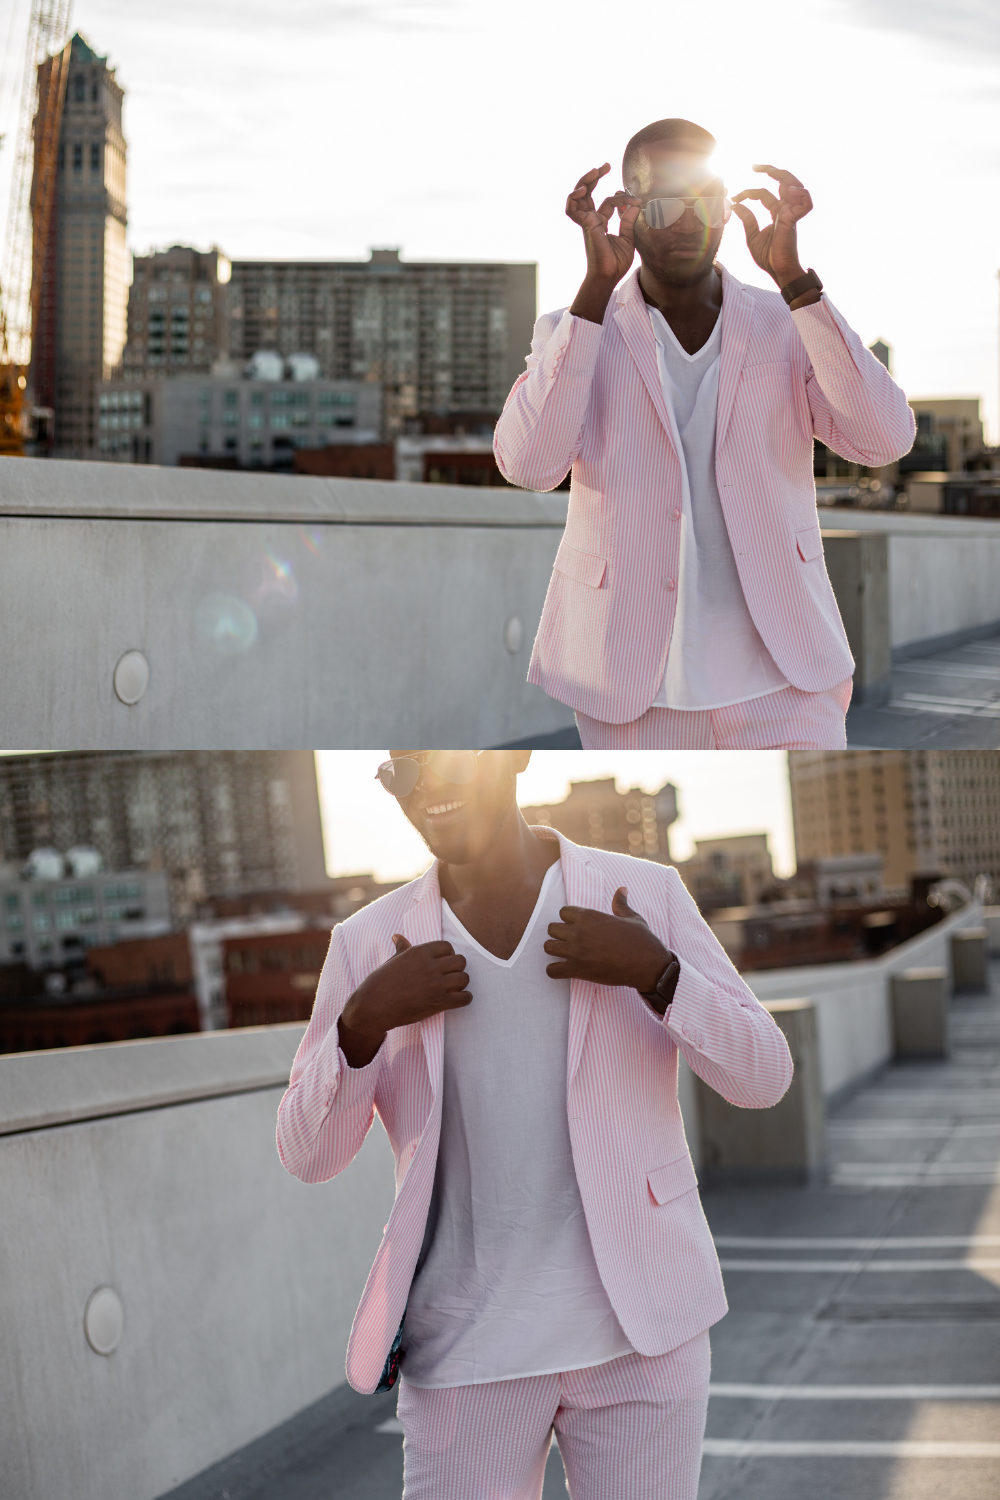 Men’s summer and fall style inspiration photoshoot in downtown Detroit, Michigan.